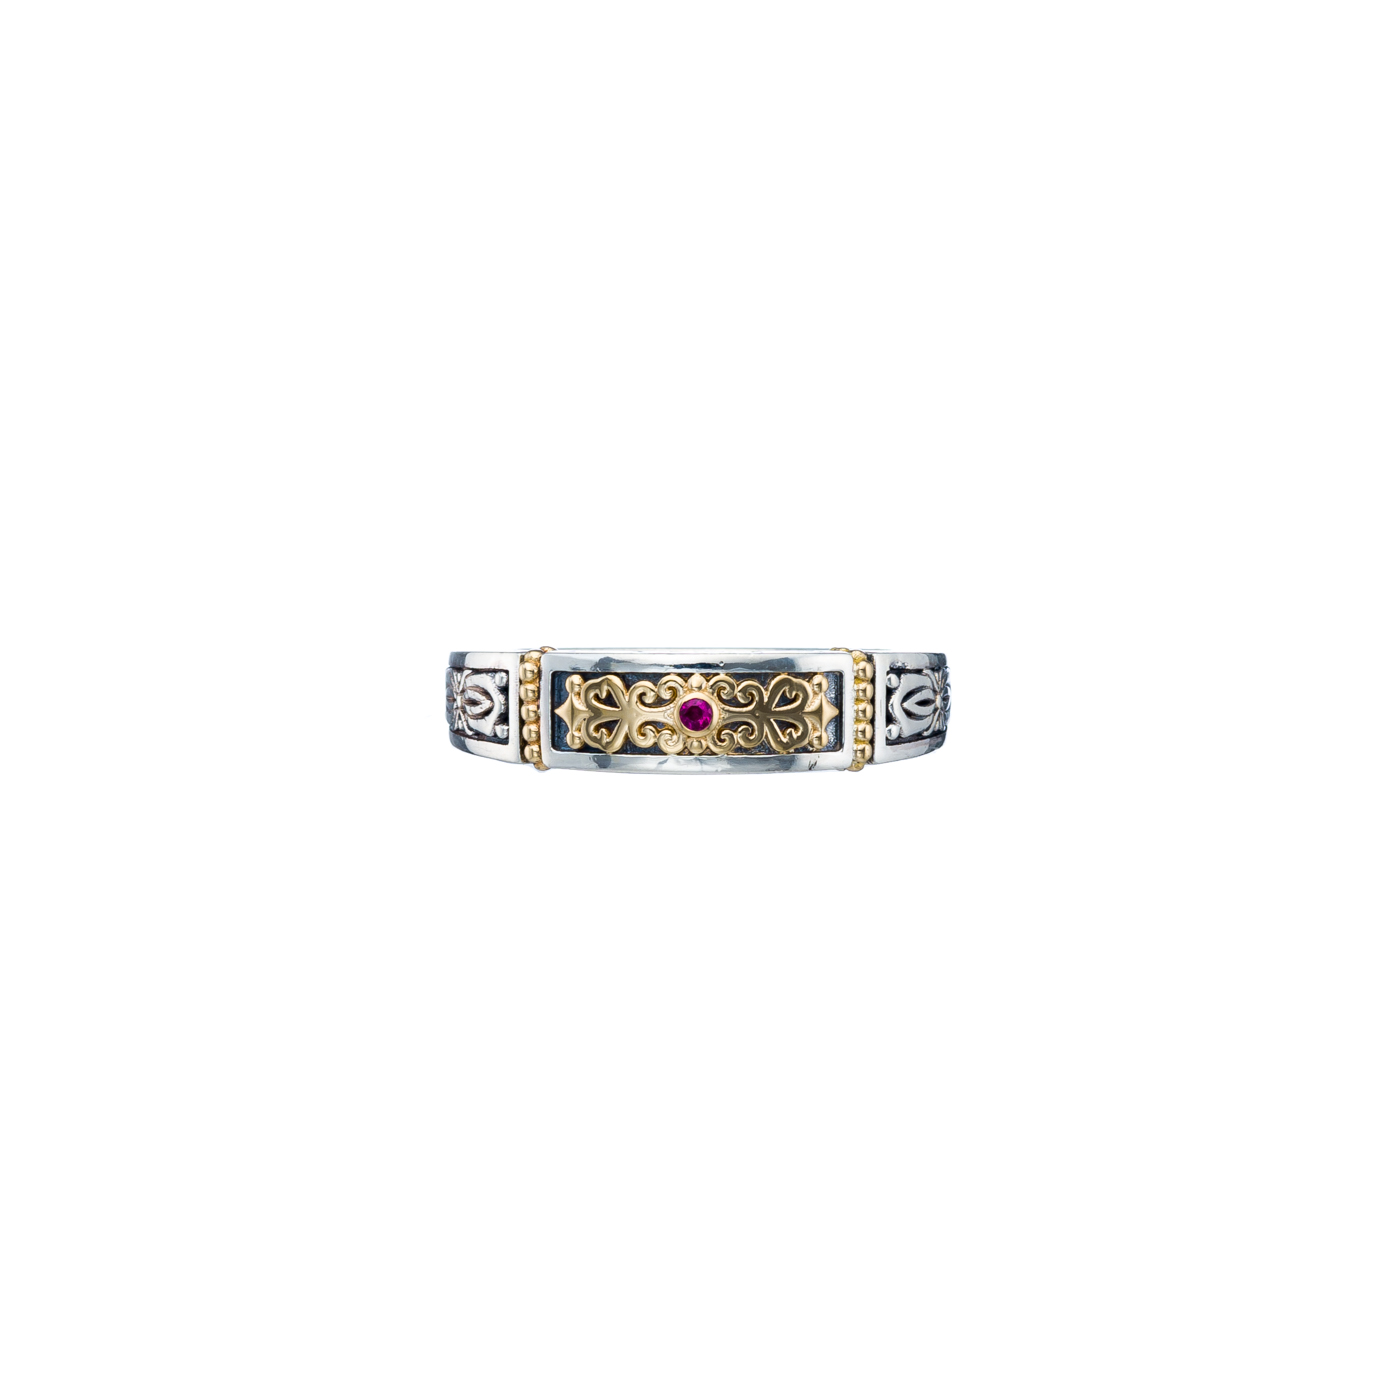 Erotokritos band ring in 18K Gold and Sterling silver